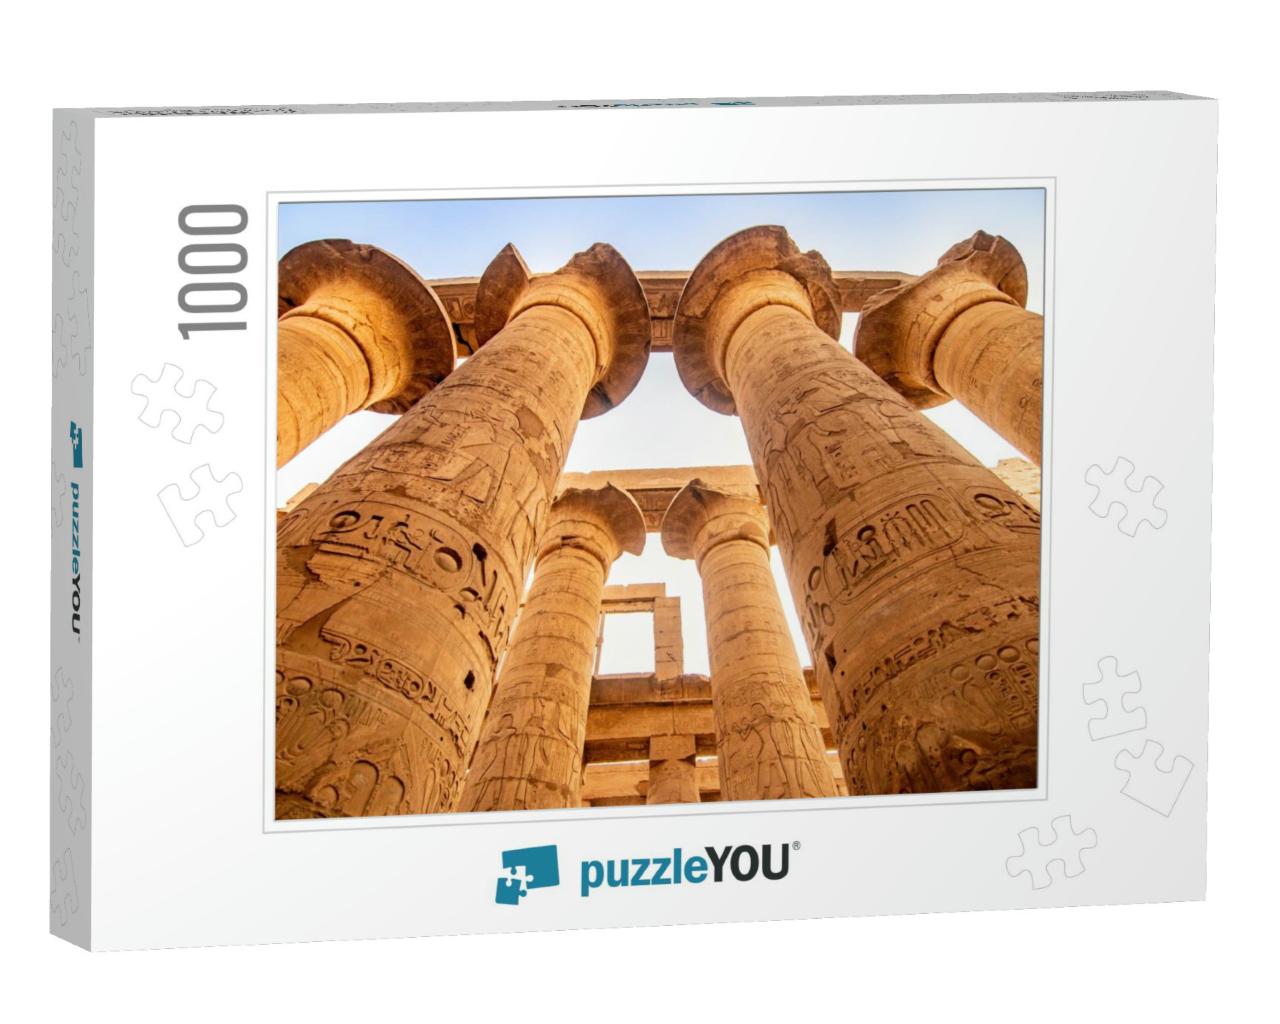 Exploring Egypt - Karnak Temple - Massive Columns Inside... Jigsaw Puzzle with 1000 pieces